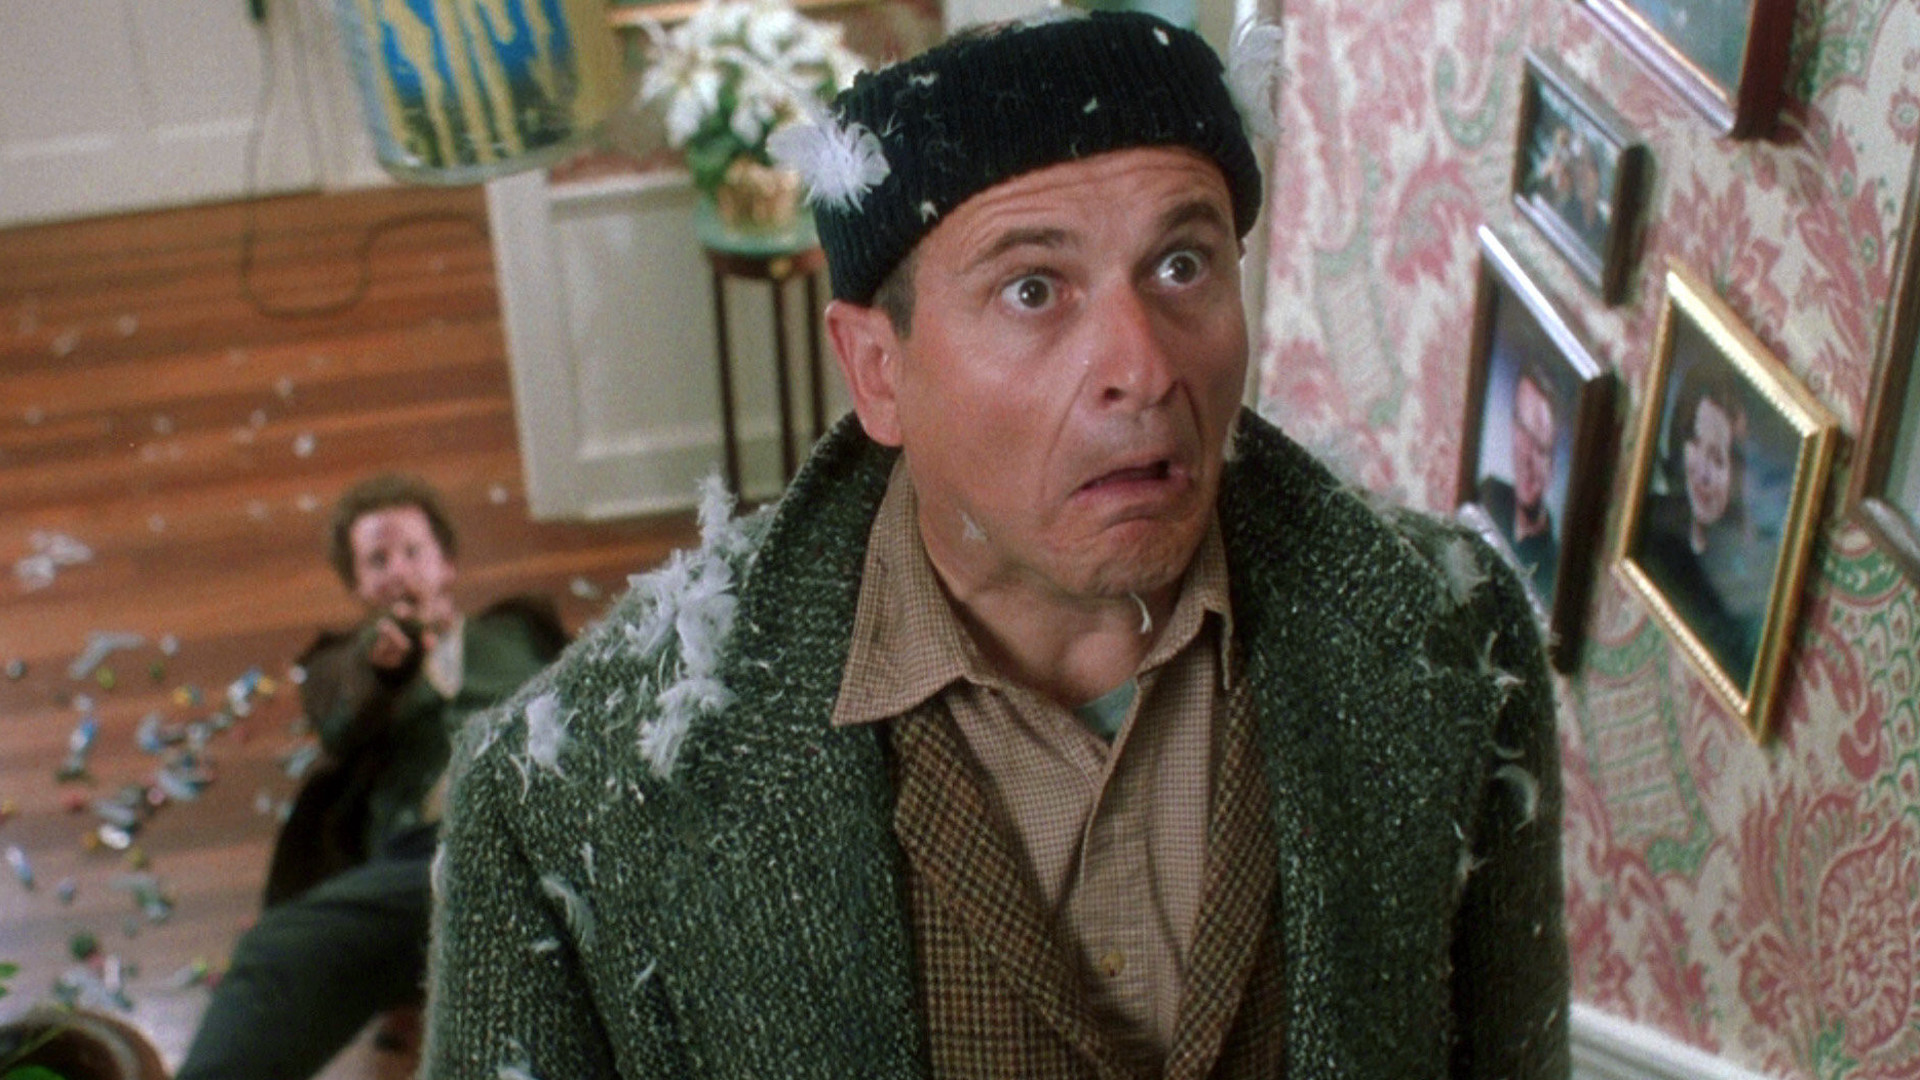 A scene from Home Alone